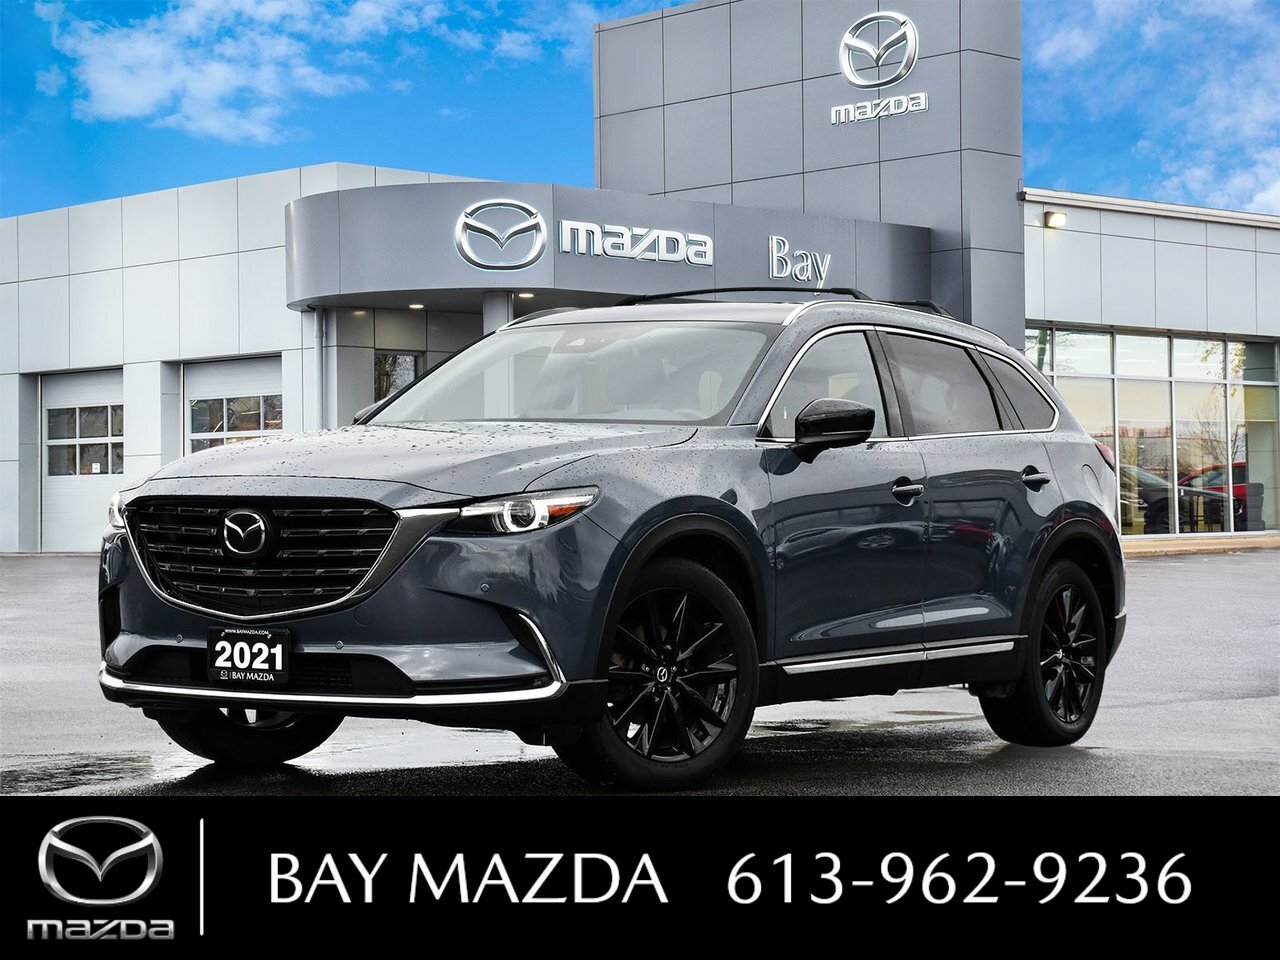 2021 Mazda CX-9 KURO GREAT KM'S / EXTENDED WARRANTY UNTIL ONCTOBER